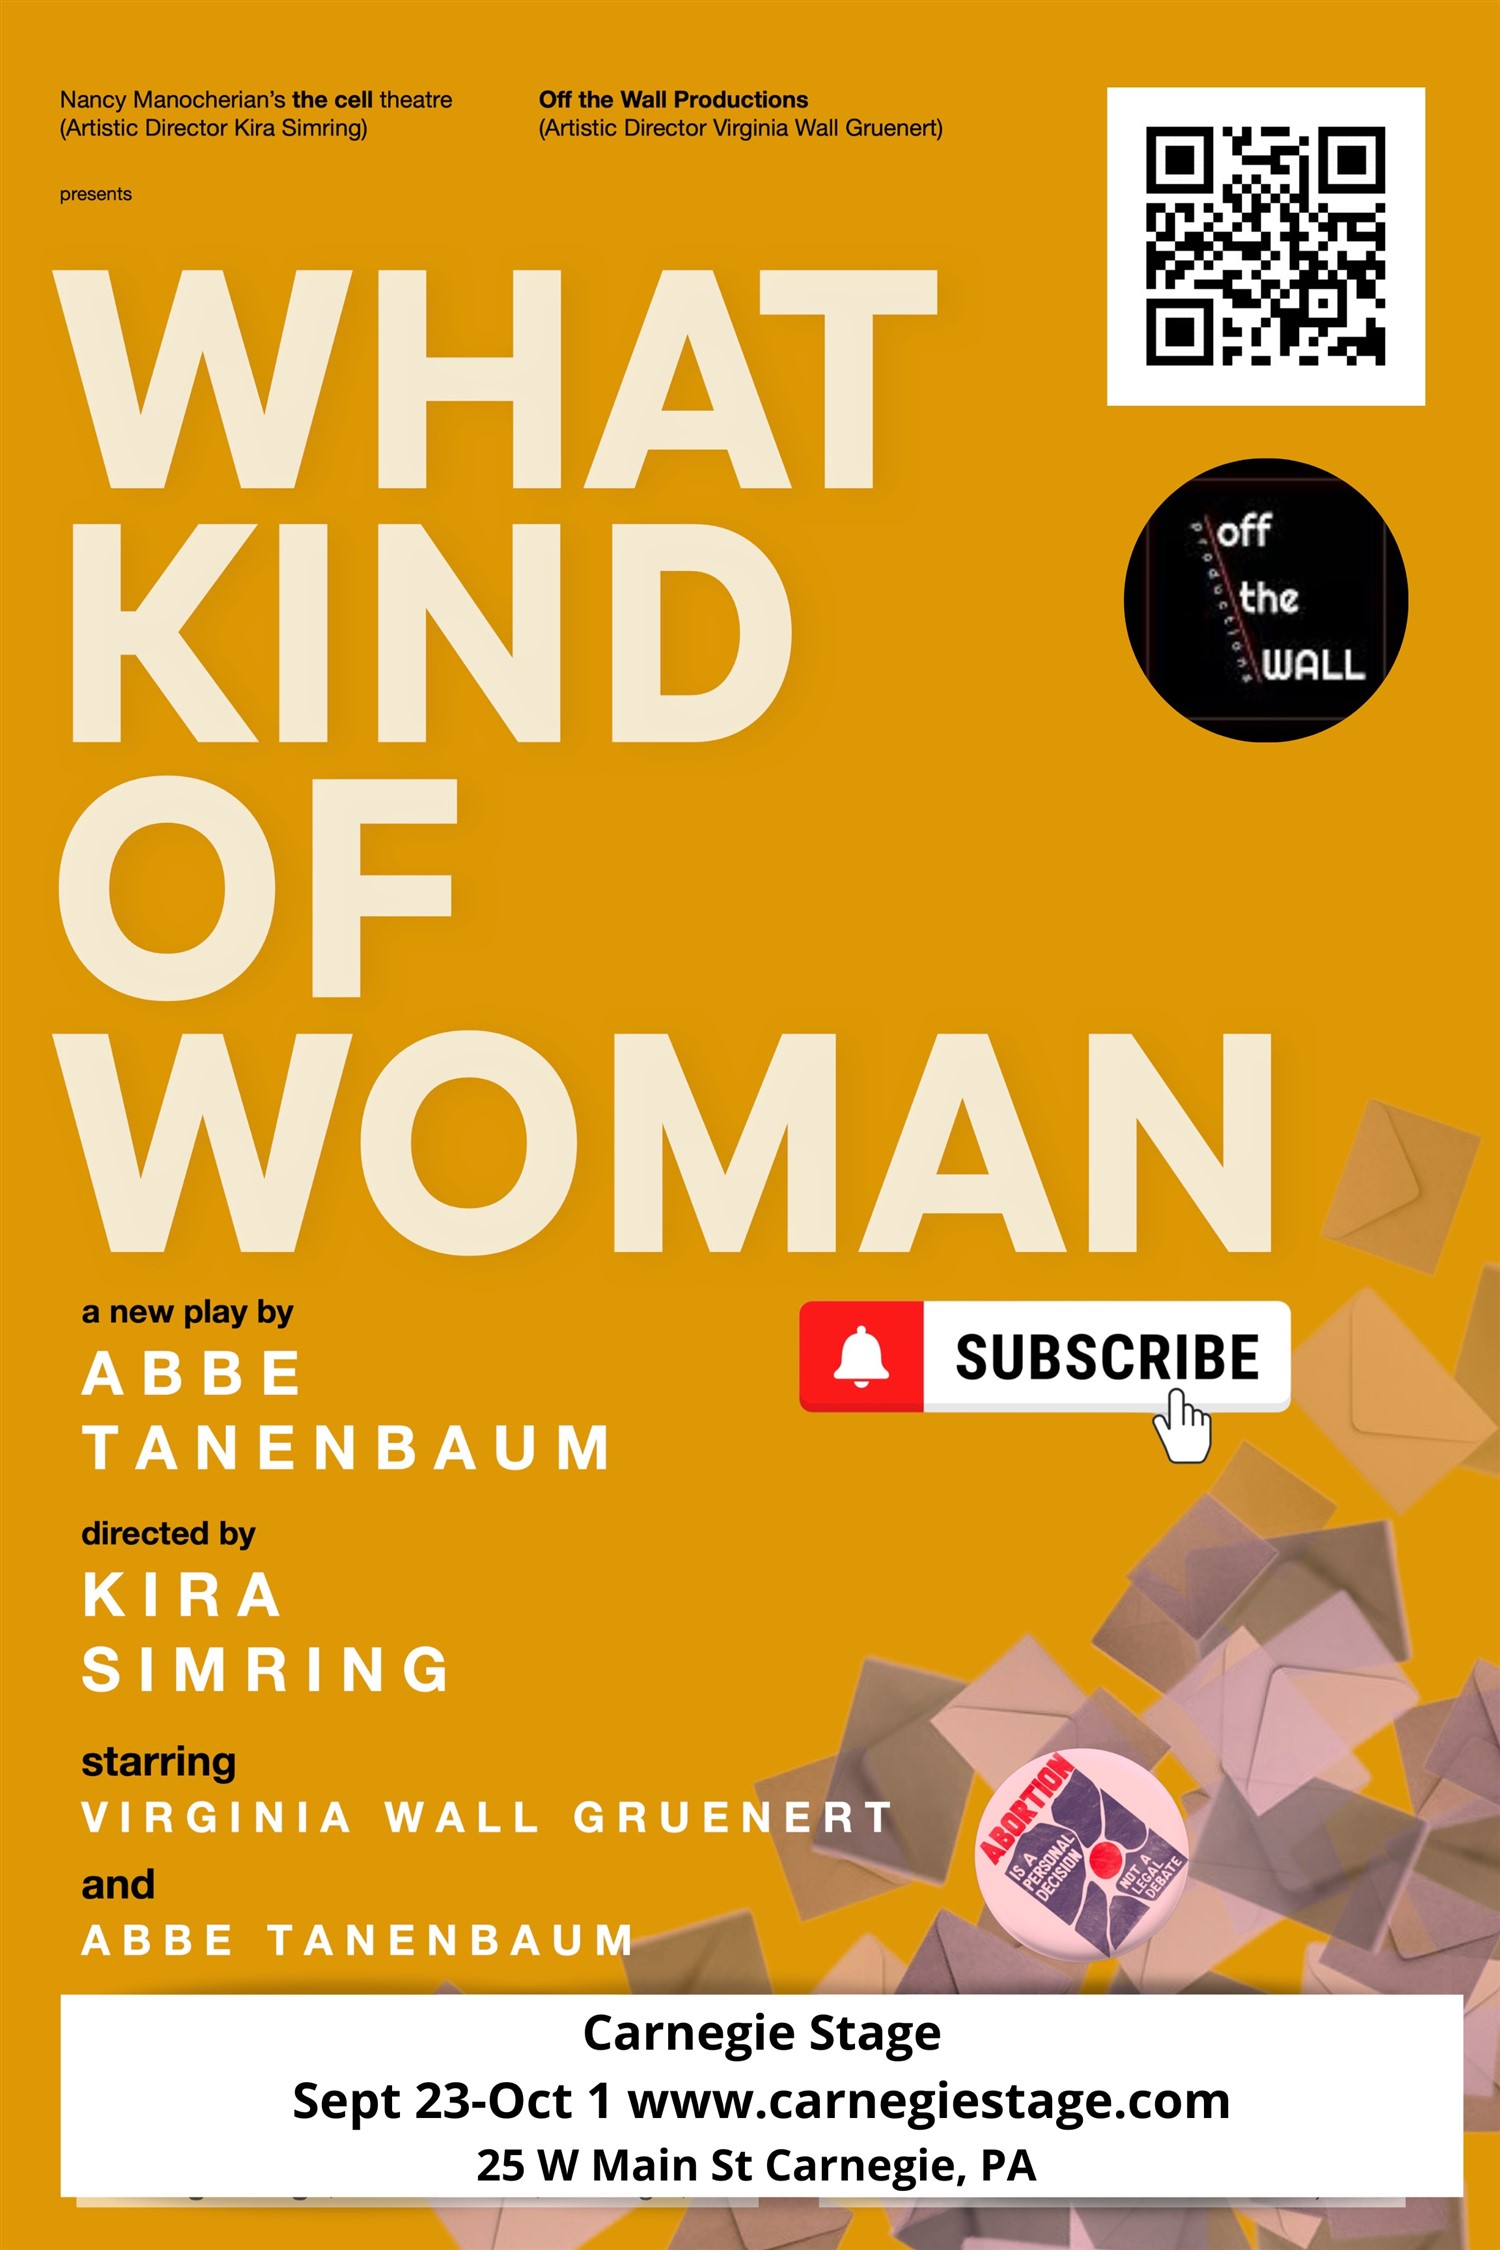 What Kind Of Woman History is repeating itself on oct. 03, 00:00@Carnegie Stage - 50 - Compra entradas y obtén información enCarnegie Stage carnegiestage